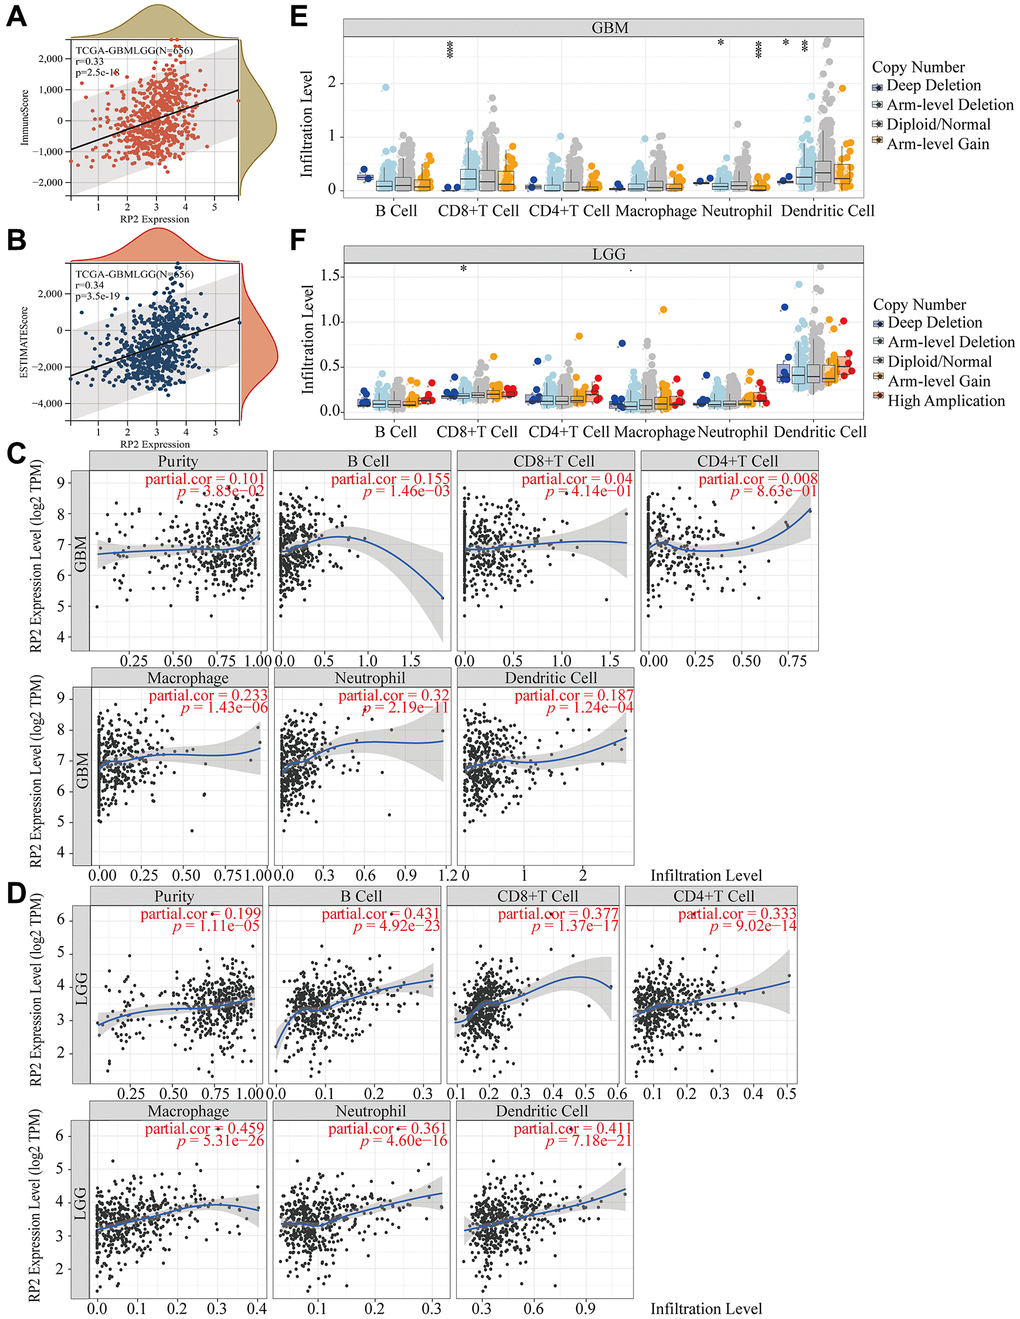 RP2 is associated with tumor immune microenvironment in LGG and GBM. (A, B) Correlation between RP2 and immune score and estimated score. (C, D) Correlation between tumor infiltrating immune cells and RP2 expression. (E, F) Correlation between CNV of RP2 and the degree of immune cell infiltration in LGG and GBM.